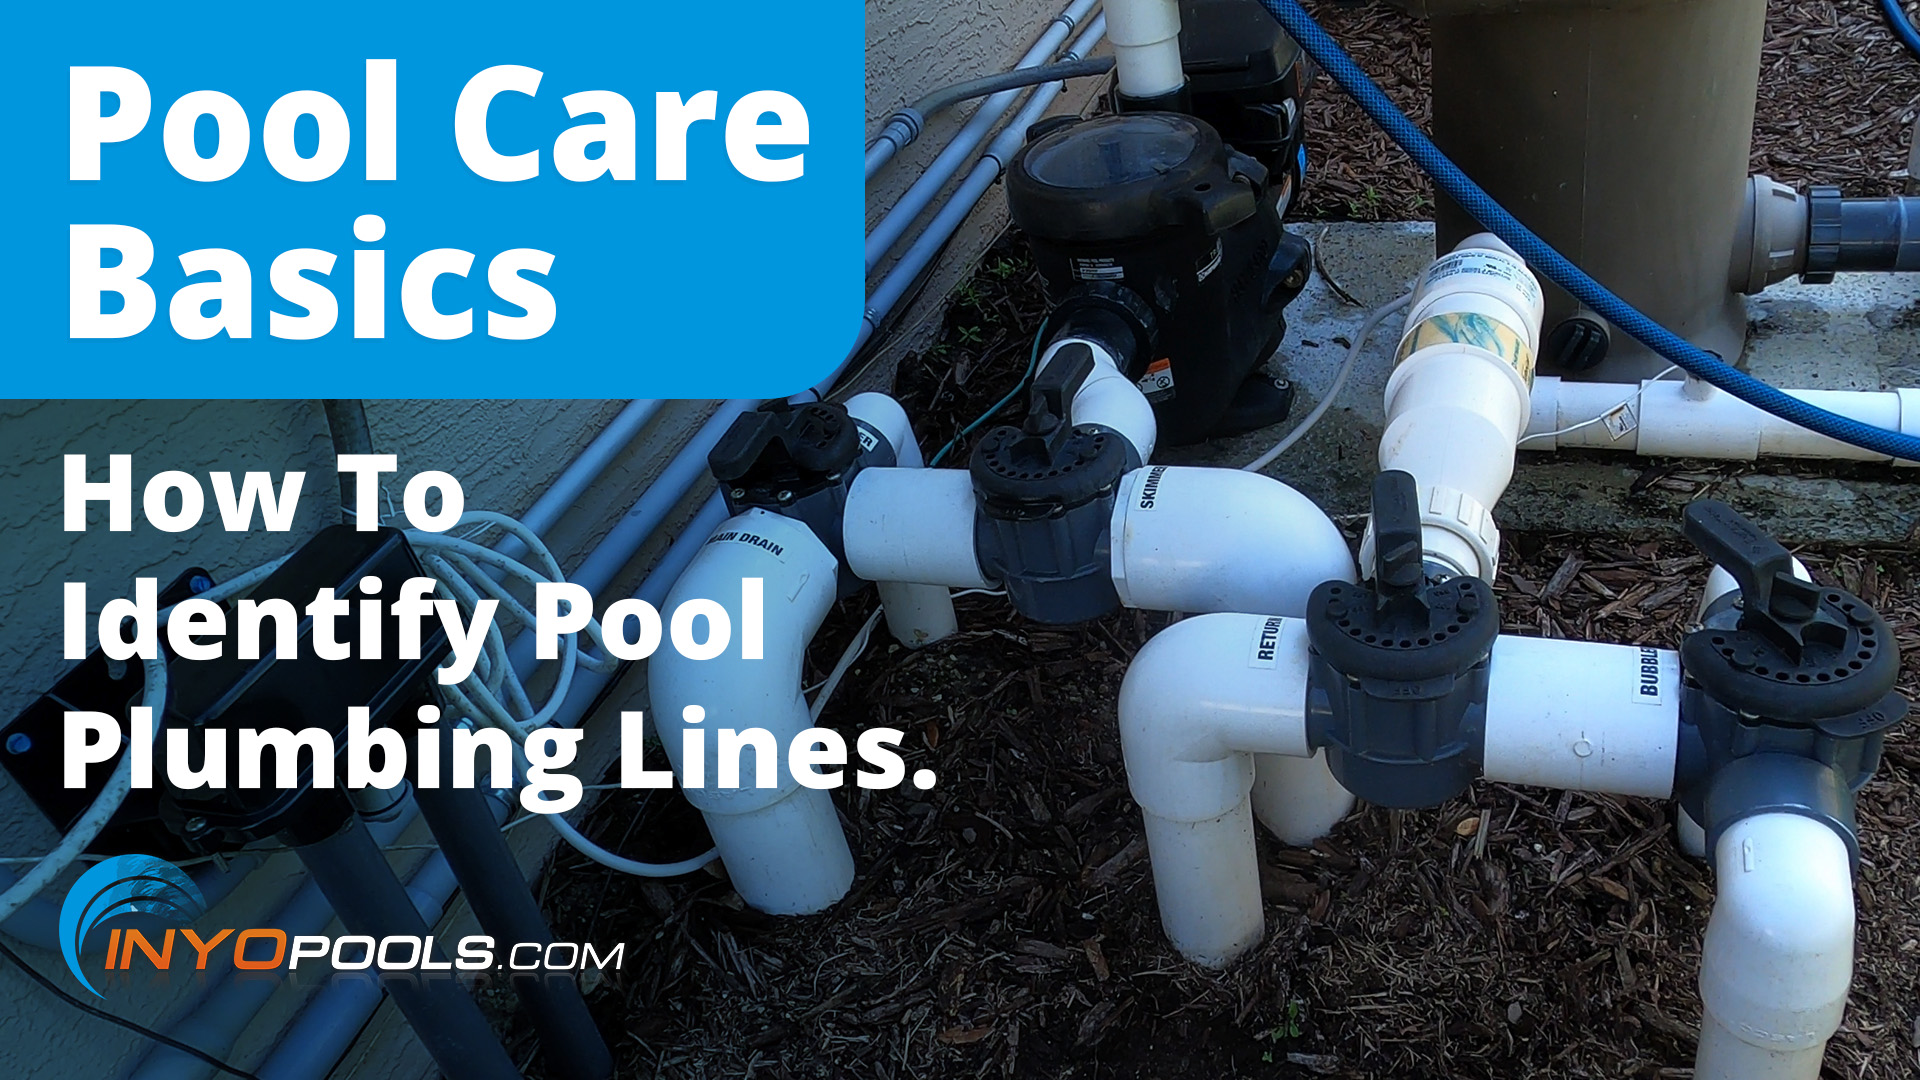 How To Identify Pool Plumbing Lines and Valves - INYOPools.com ...